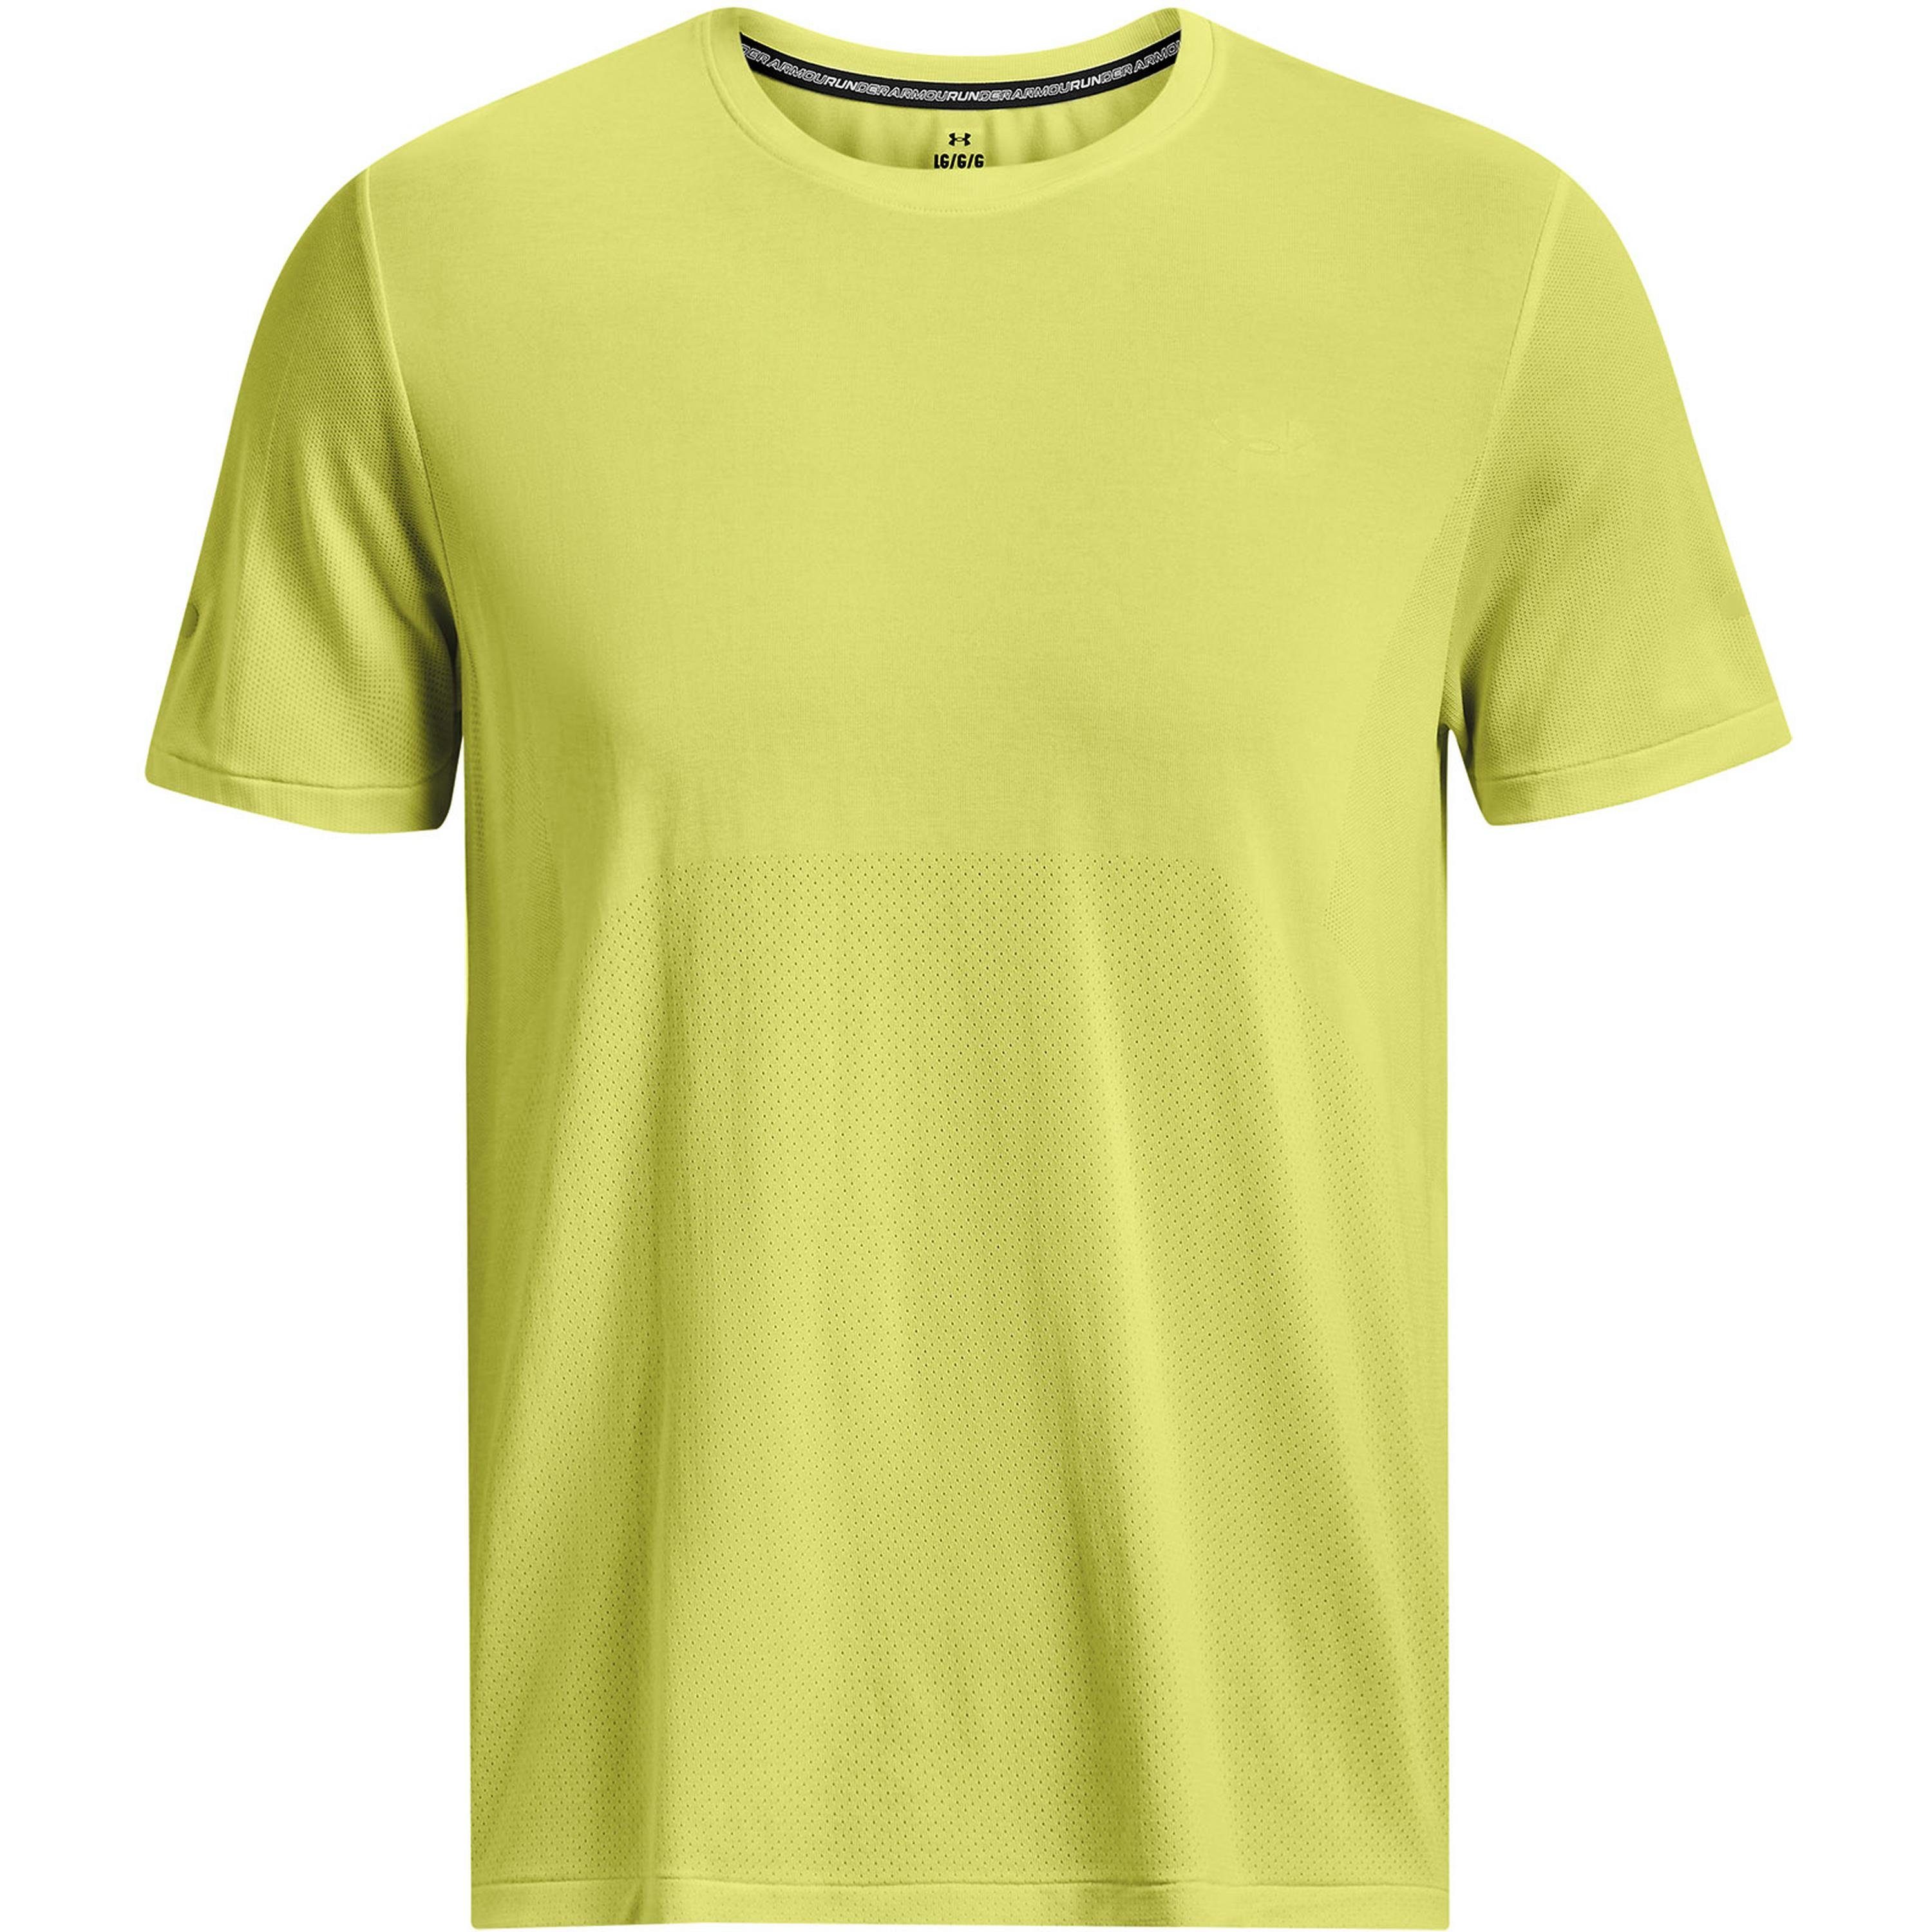 Under Armour® Funktionsshirt SEAMLESS STRIDE lime yellow